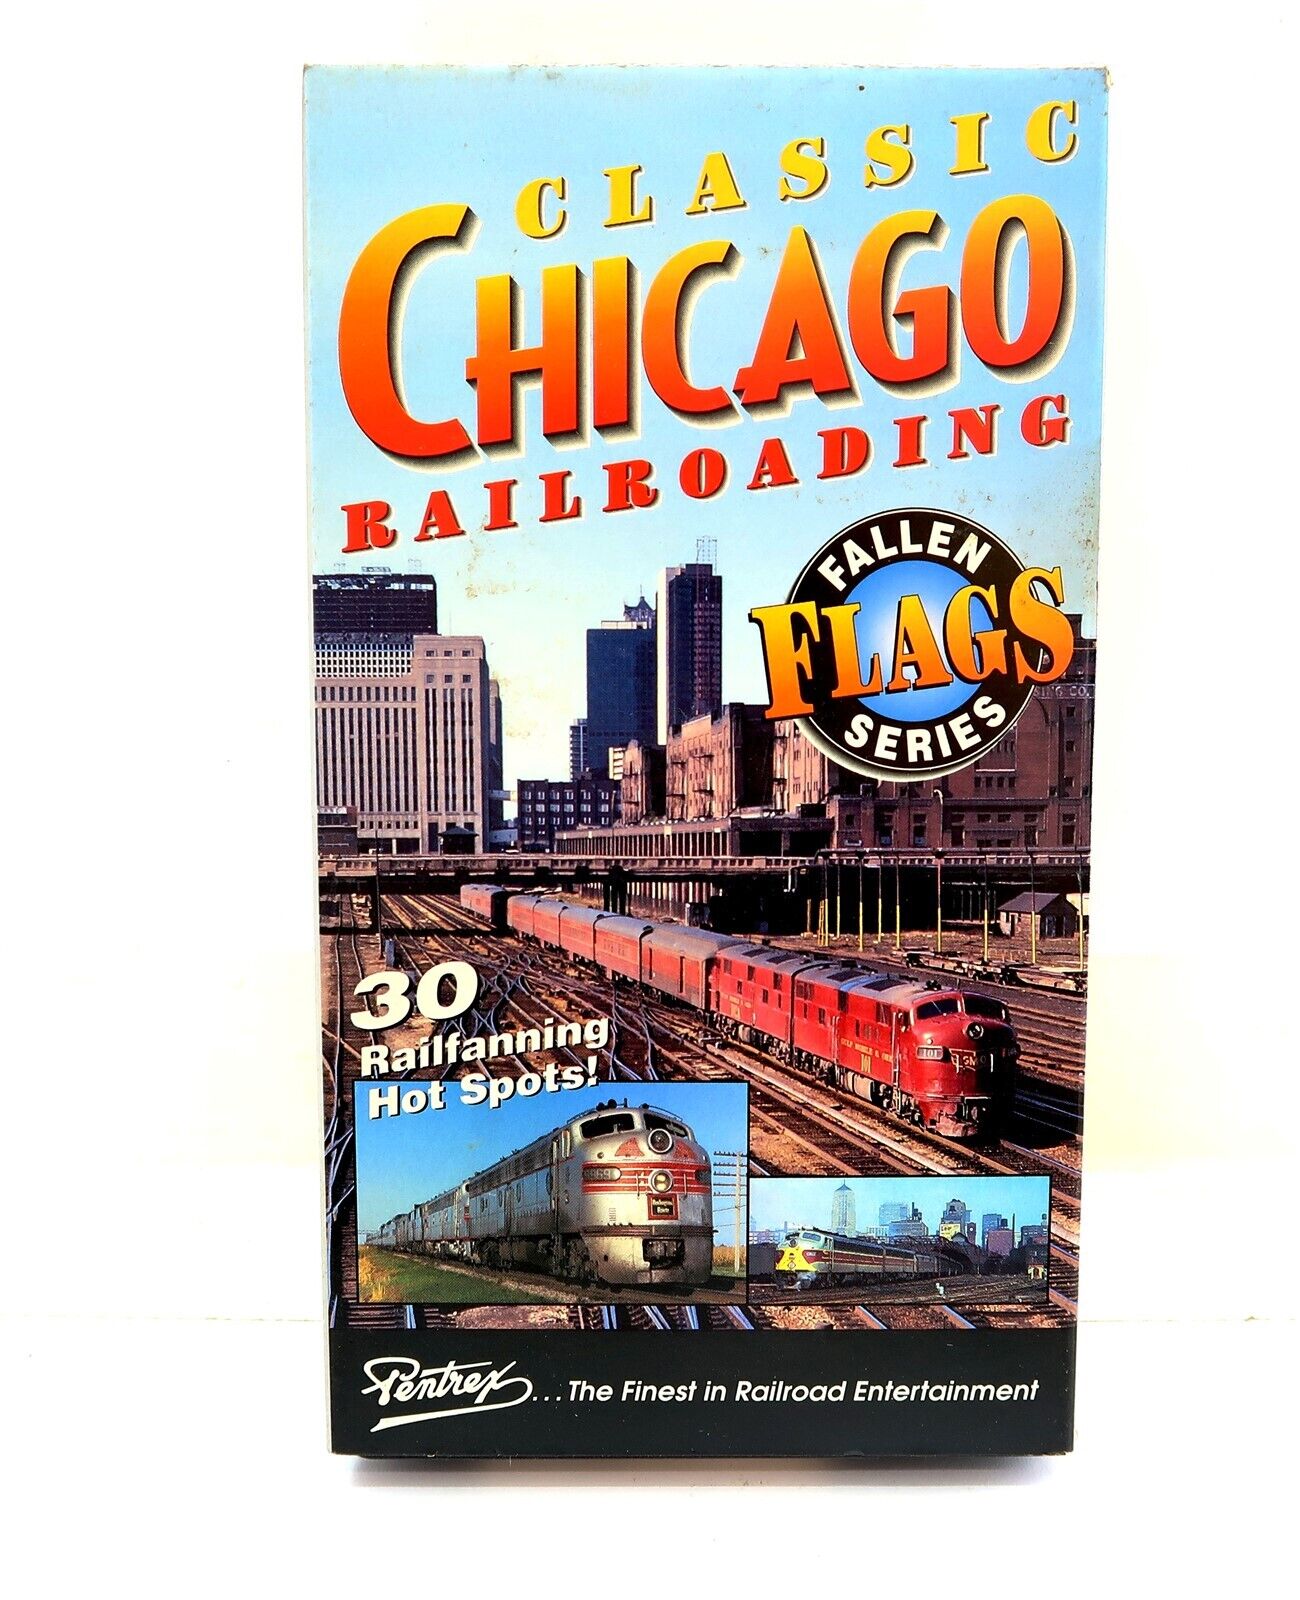 CLASSIC CHICAGO RAILROADING VHS VCR Tape Train Railroad Related by Pentrex